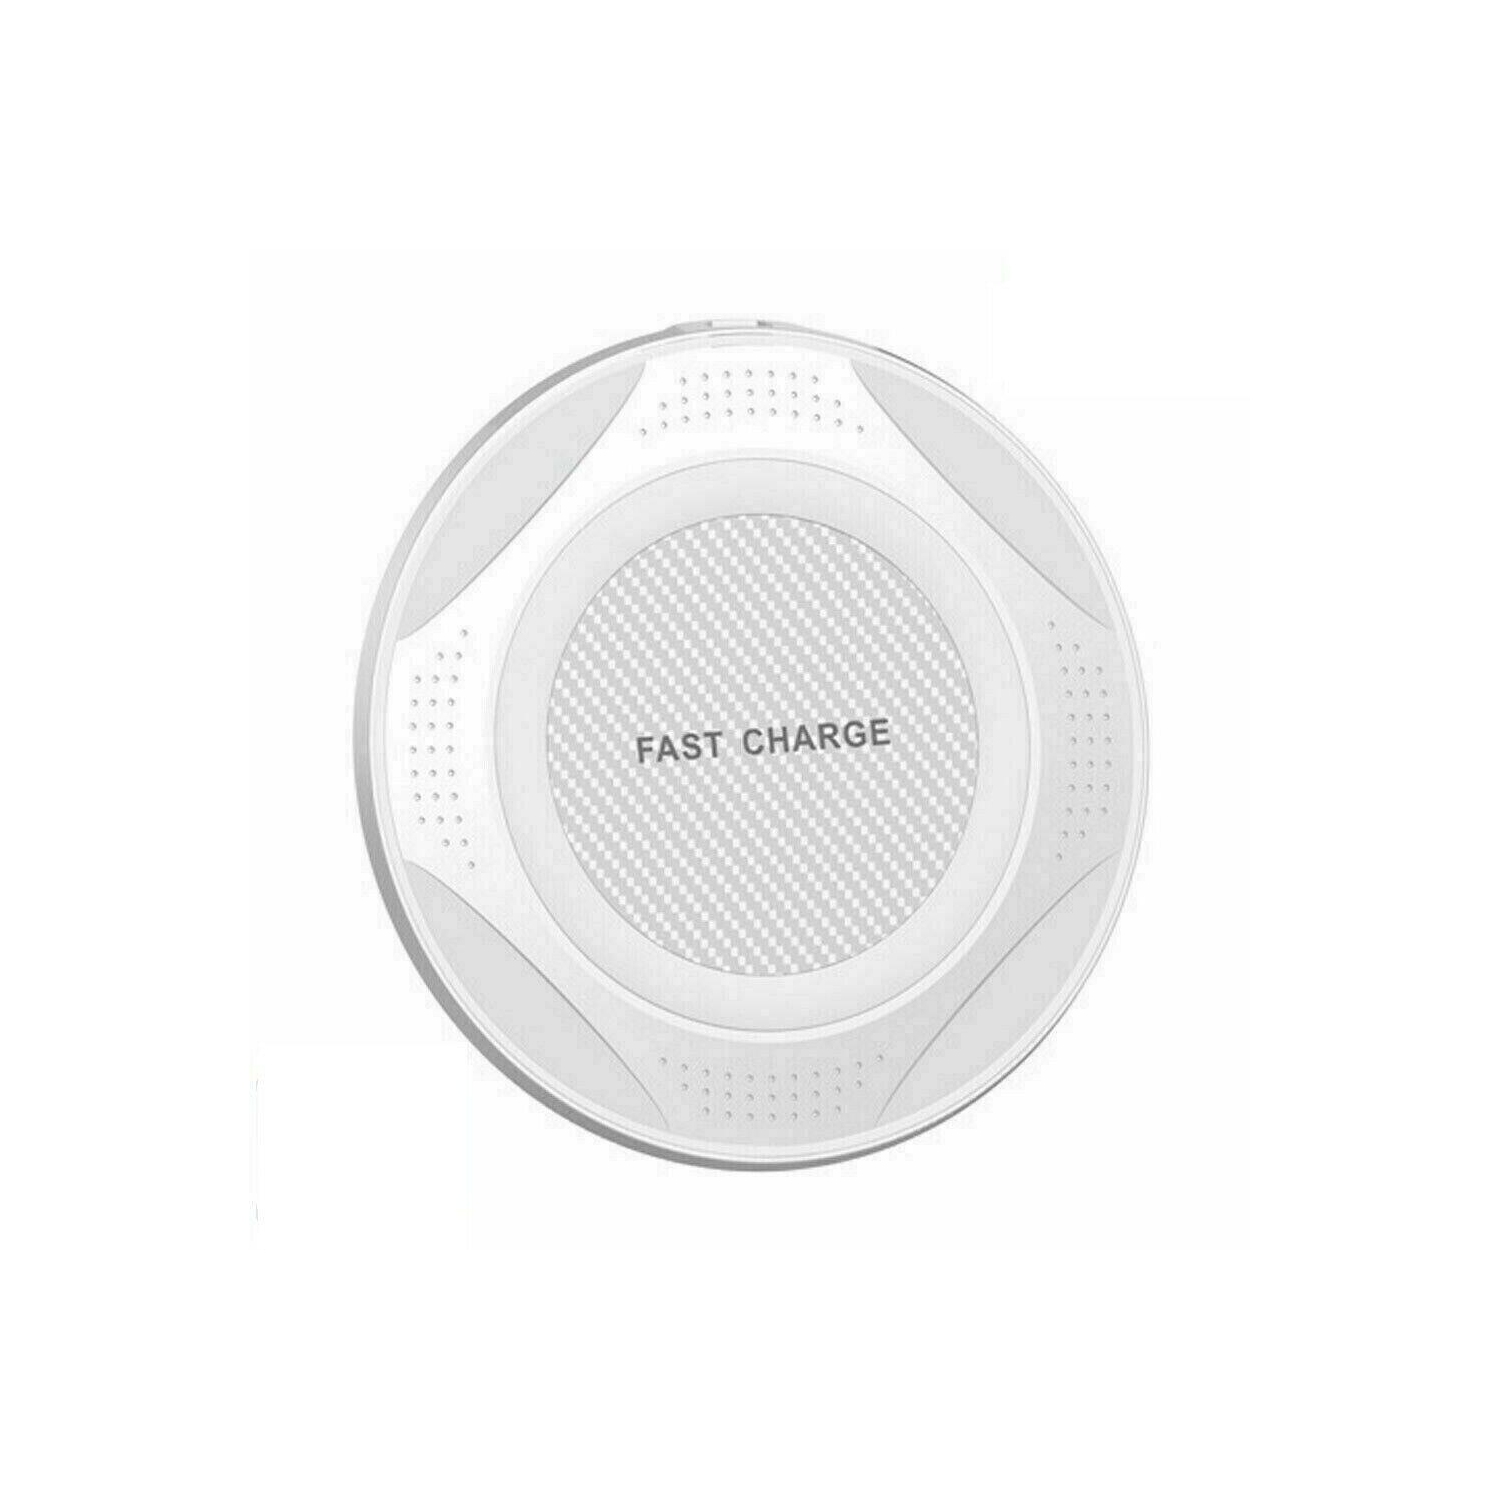 Qi Wireless Fast Charger Charging Pad Mat Receiver for iPhone 5 5s SE 6 Phone CA